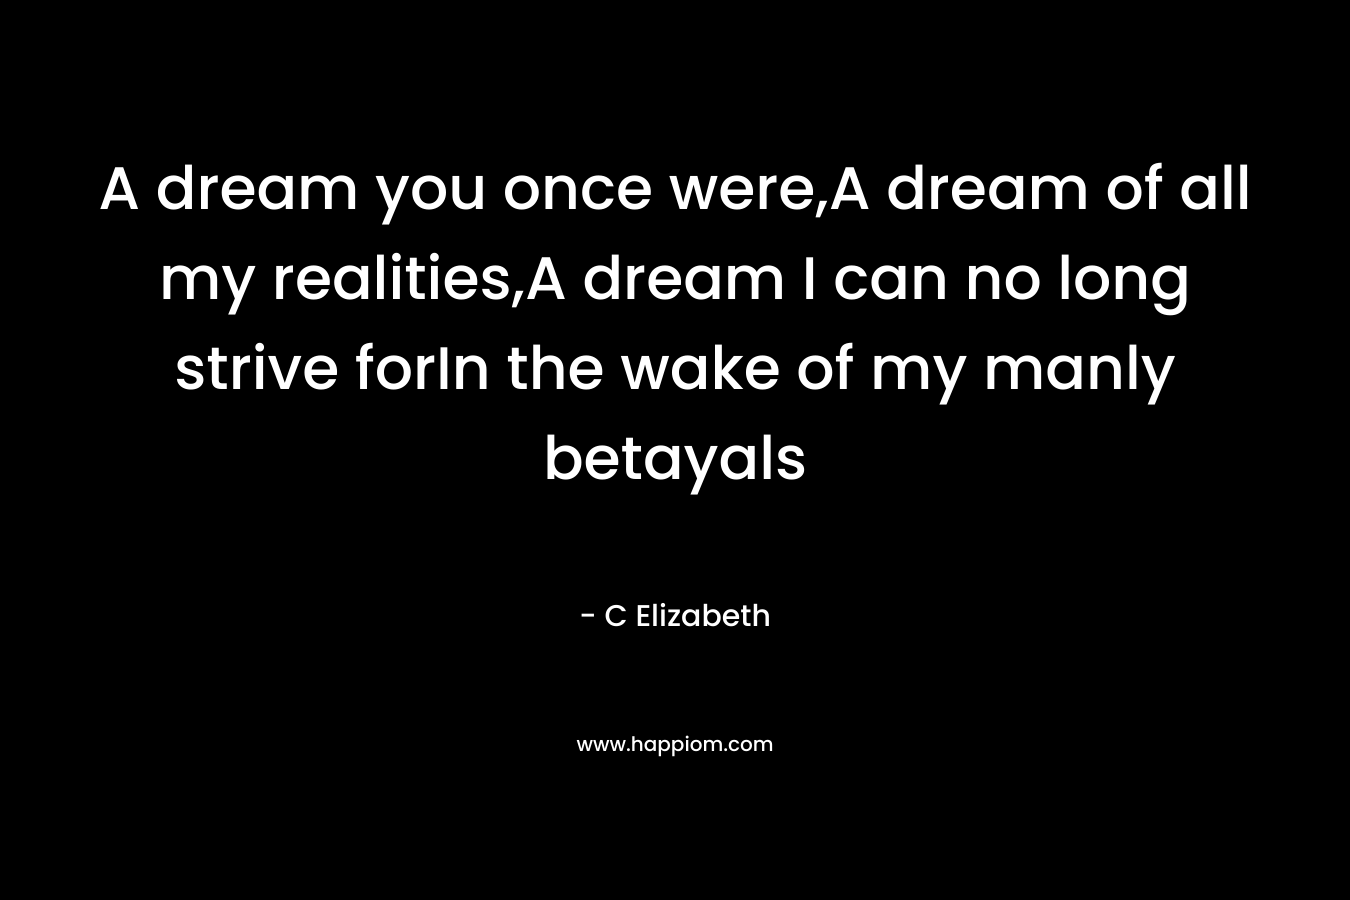 A dream you once were,A dream of all my realities,A dream I can no long strive forIn the wake of my manly betayals